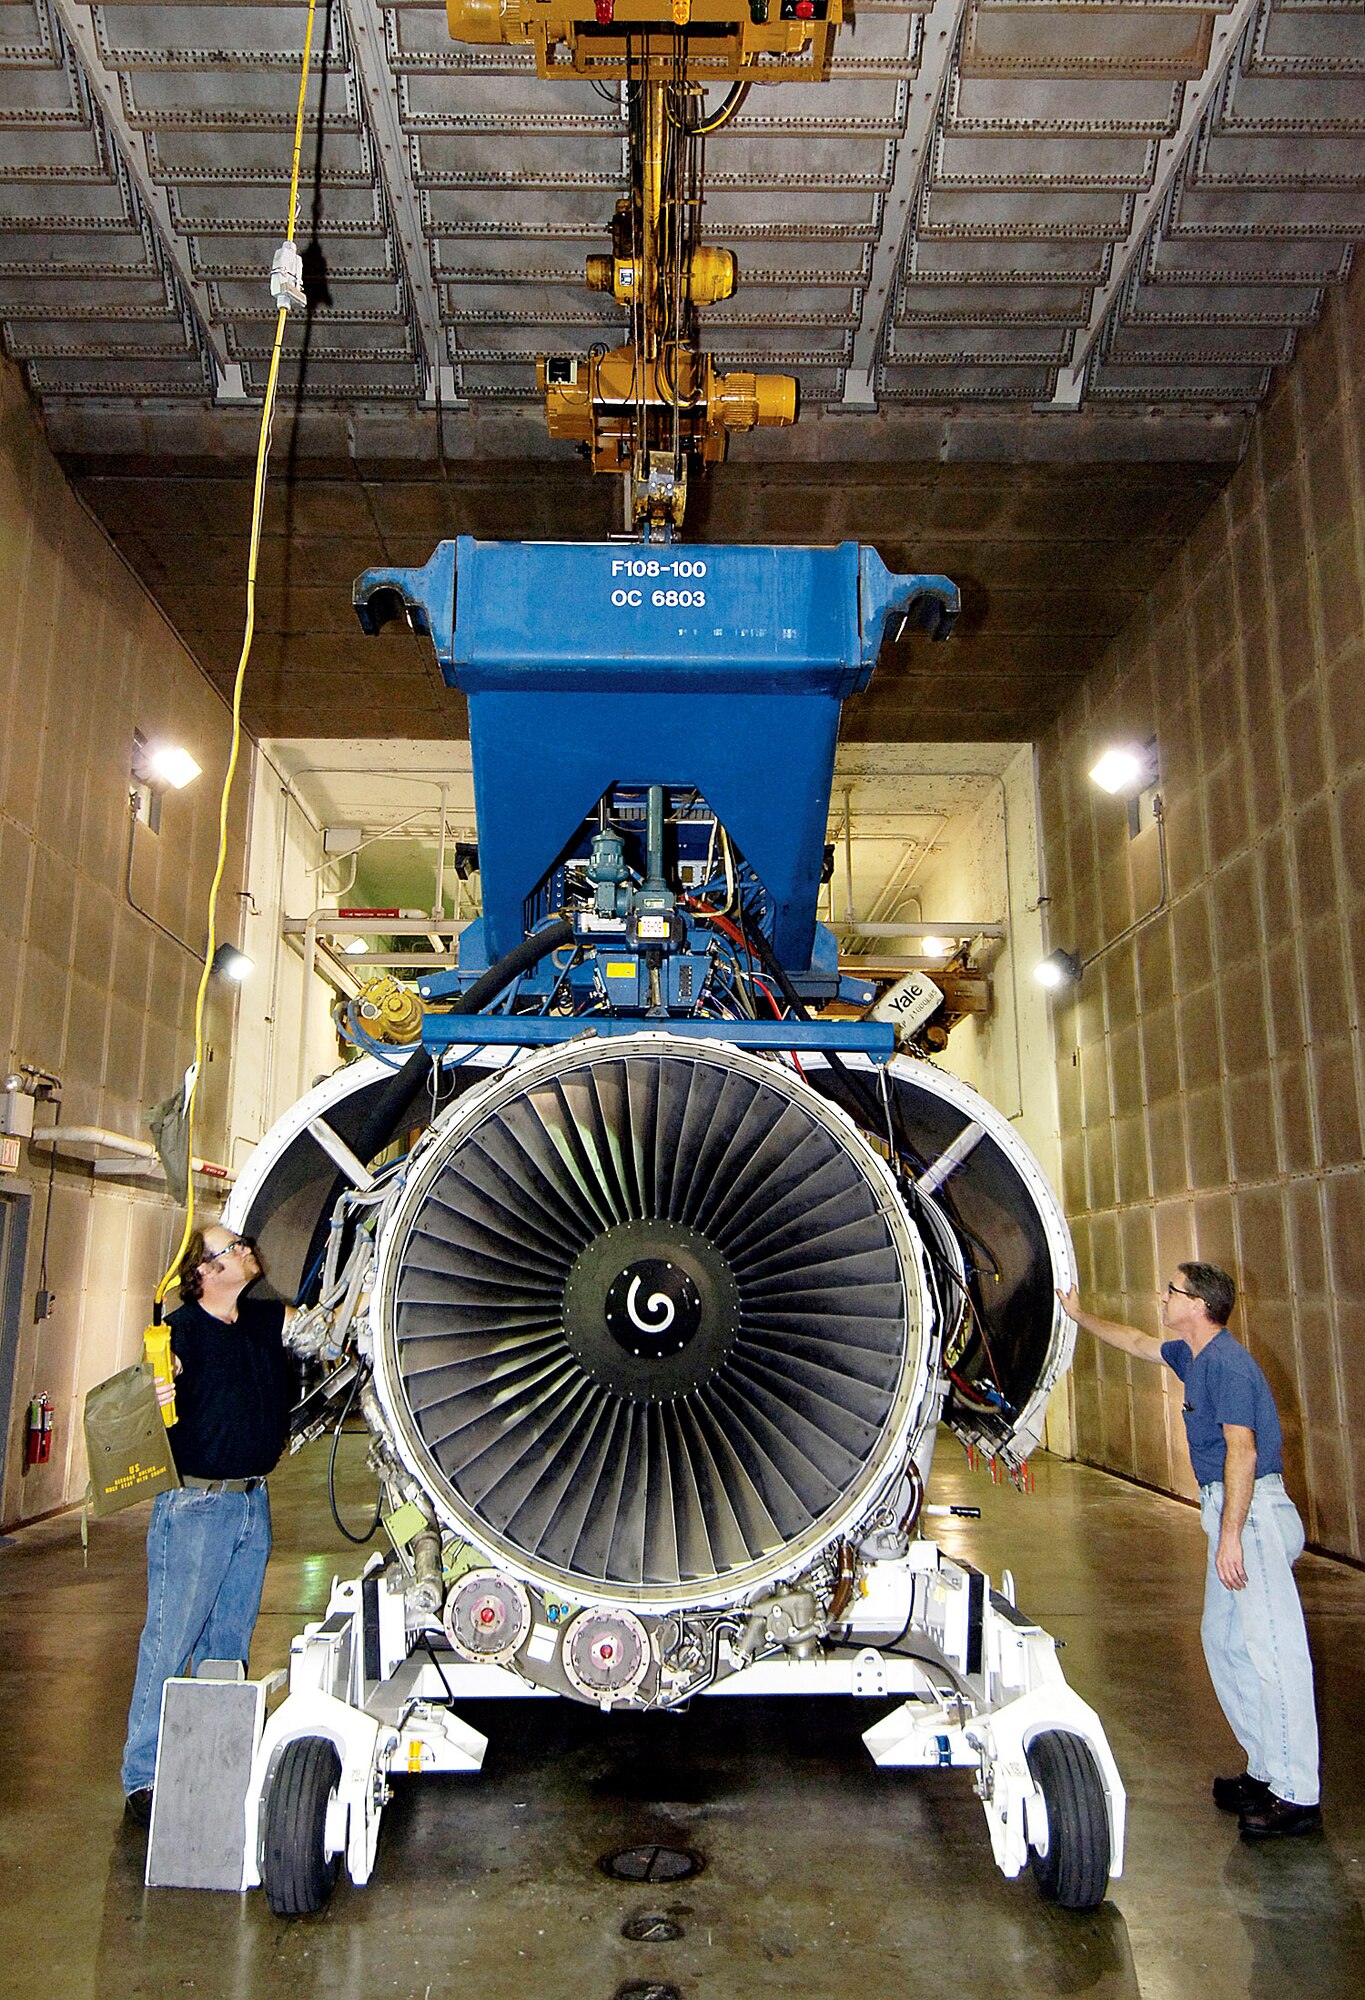 An F108-200 engine is moved by Steve Marlett (left) and William LeRoy after testing at the engine test cell of the 76th Propulsion Maintenance Group Oct. 2 at Tinker Air Force Base, Okla. (U.S. Air Force photo/Margo Wright) 
